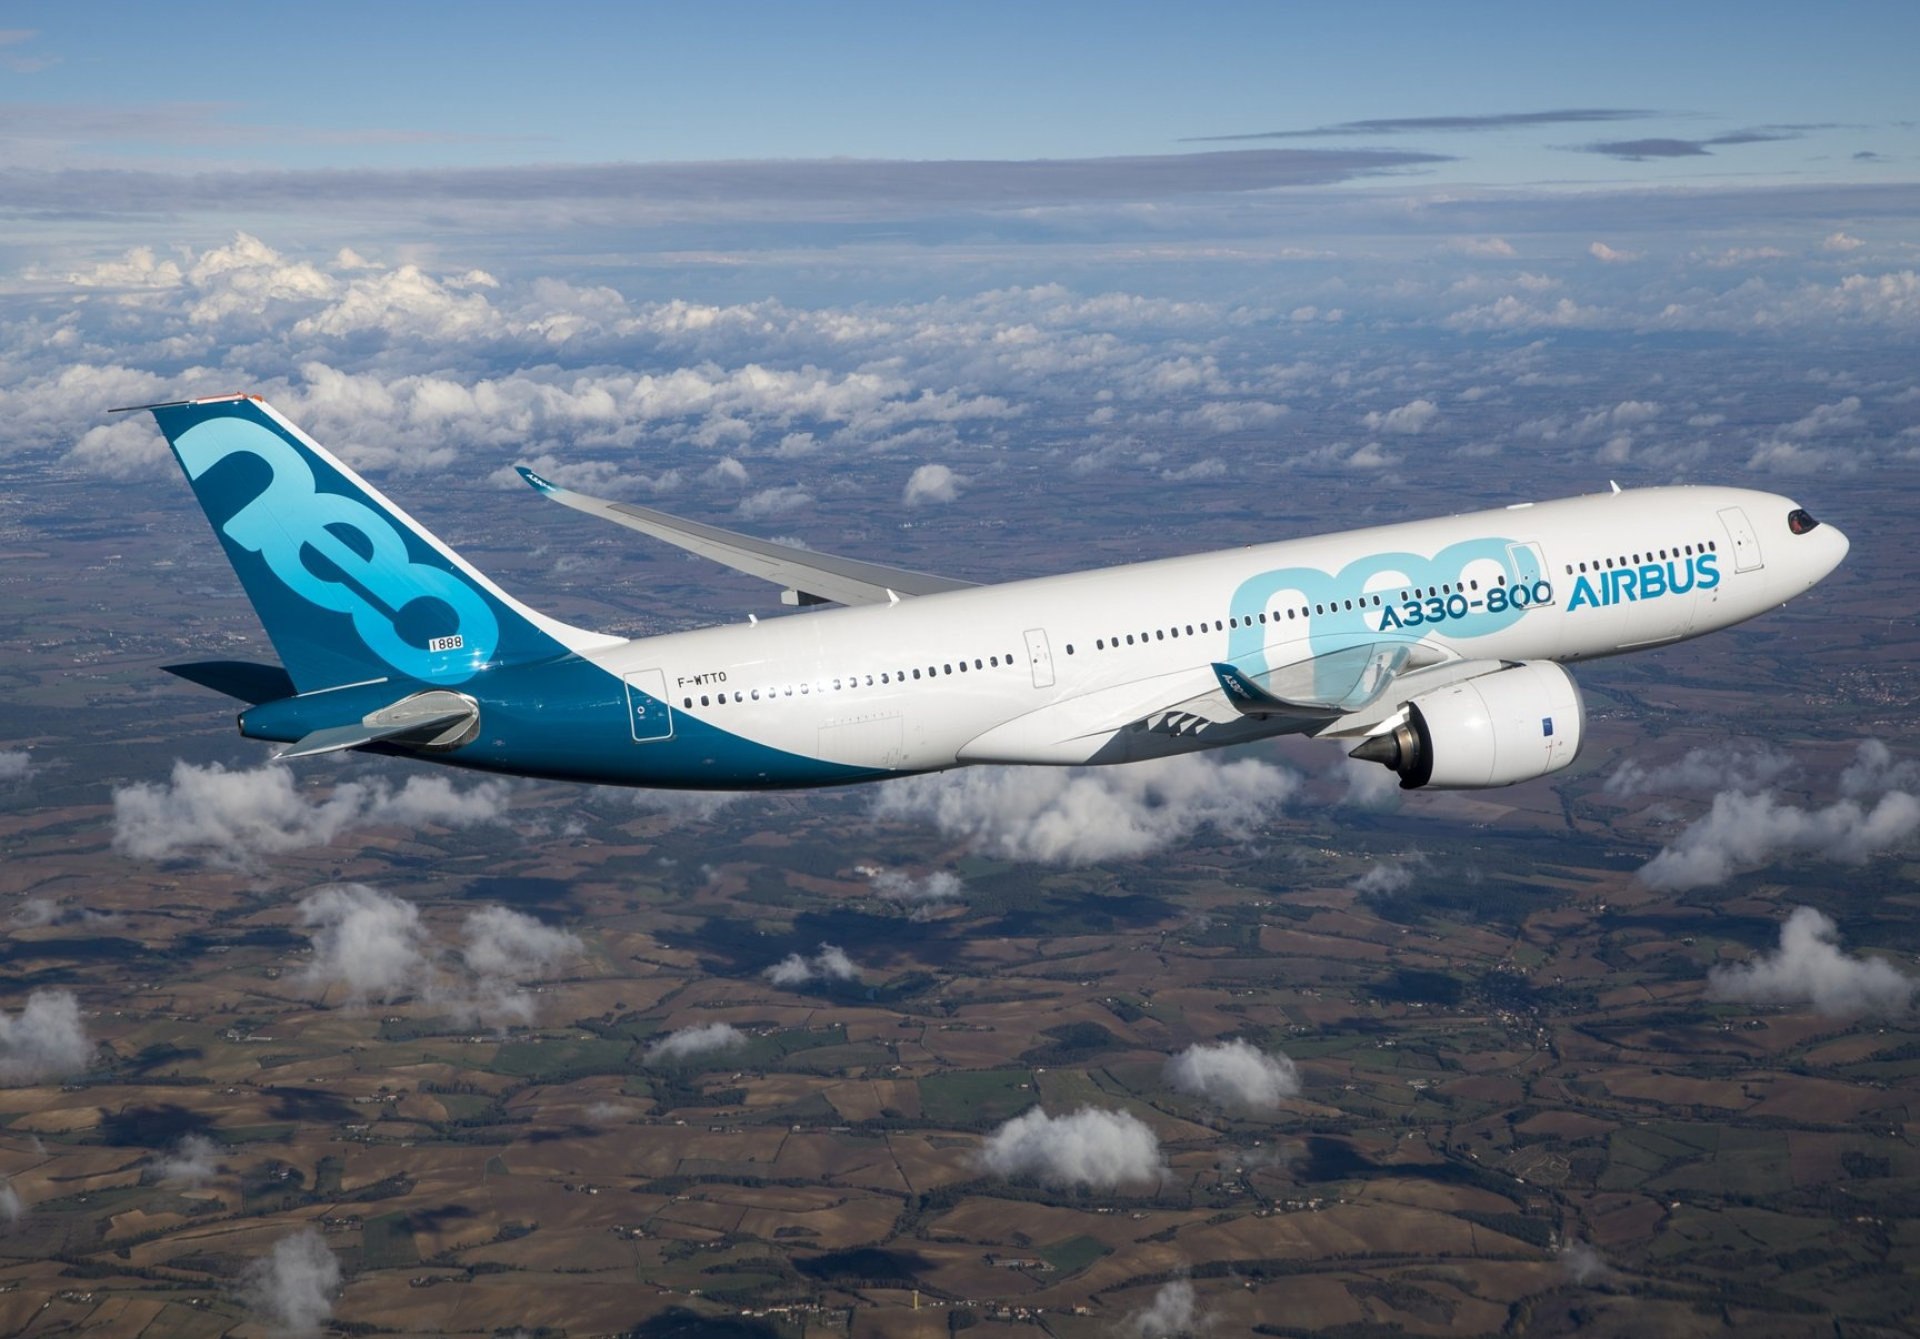 Airbus A330, A330 wallpapers, A330 backgrounds, A330 plane, 1920x1340 HD Desktop